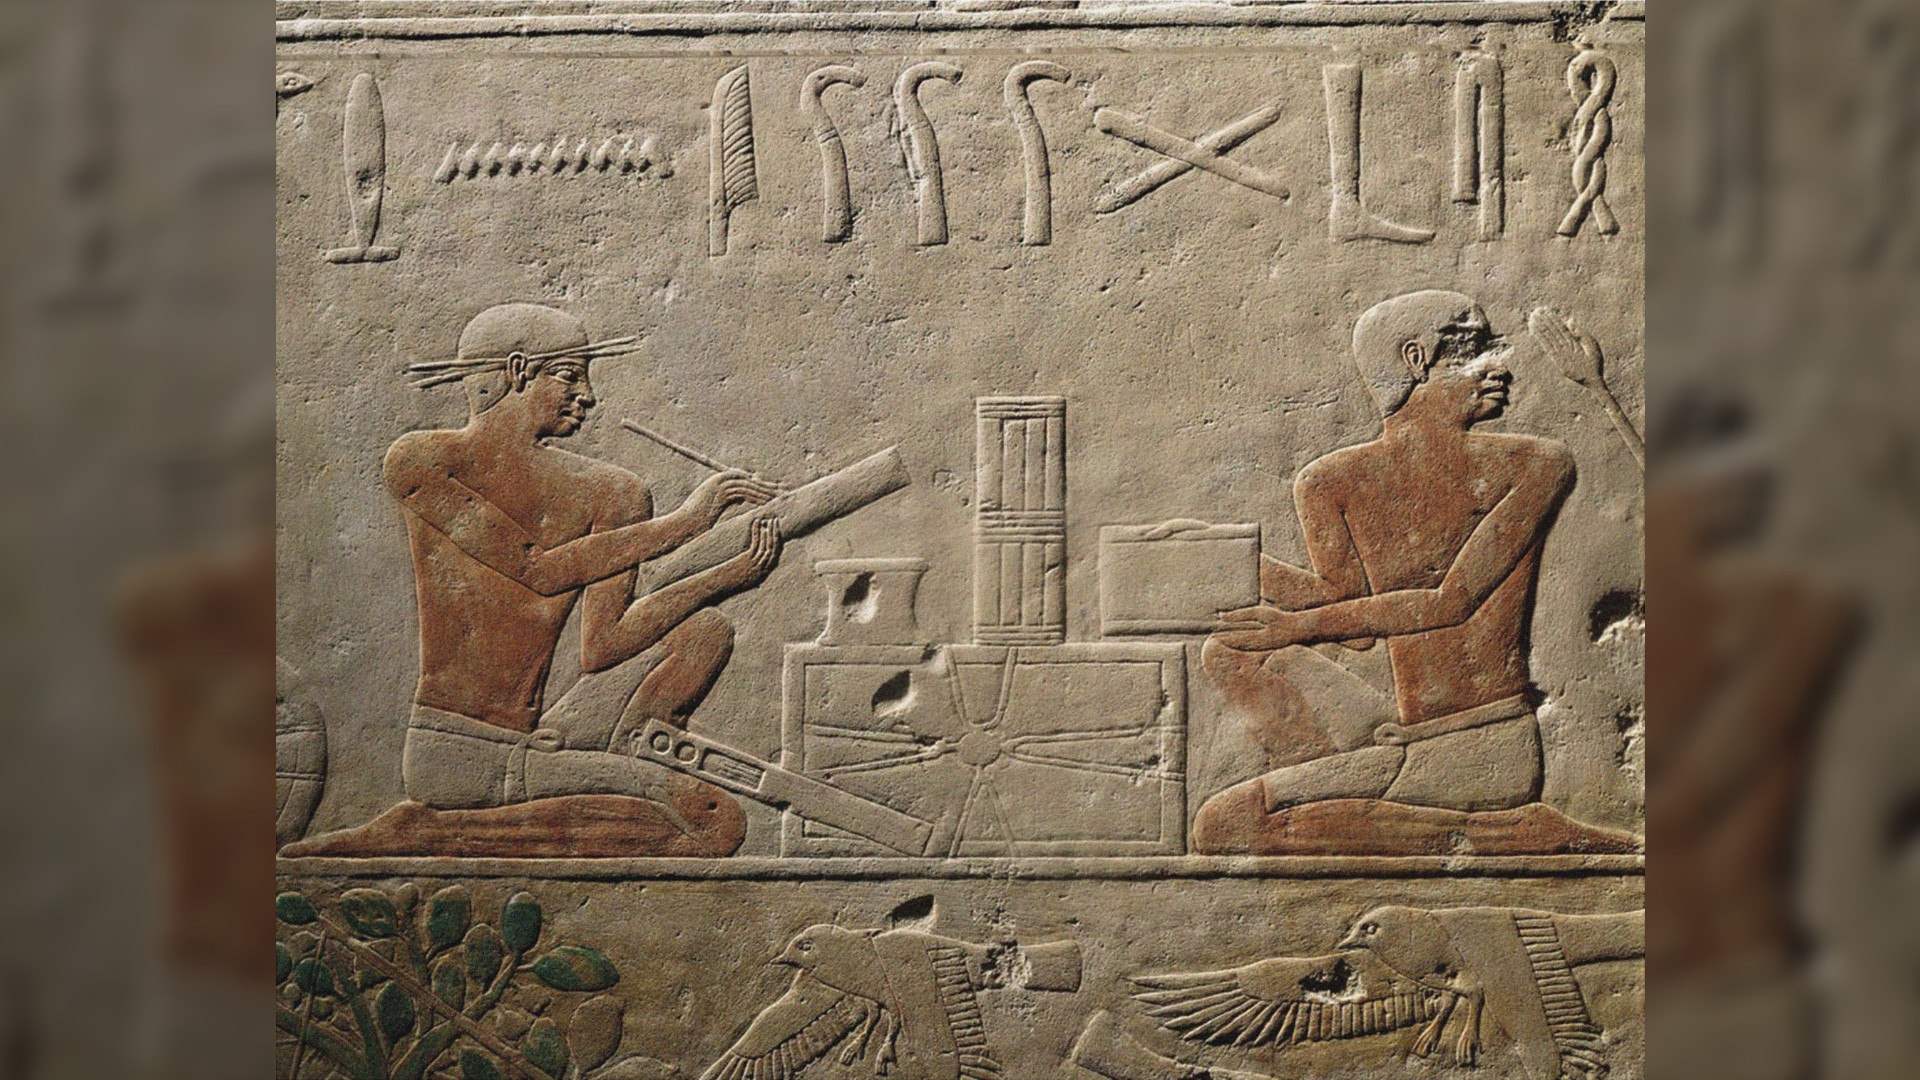 This is a relief from the Mastaba of Akhethotep in Saqqara, Old Kingdom circa 5th Dynasty, circa 2494-2345 BC Here we see 2 scribes facing each other.  One is writing on a tablet, while the other holds some parchment.  Above them are some hieroglyphs and below there are 2 images of flying birds.